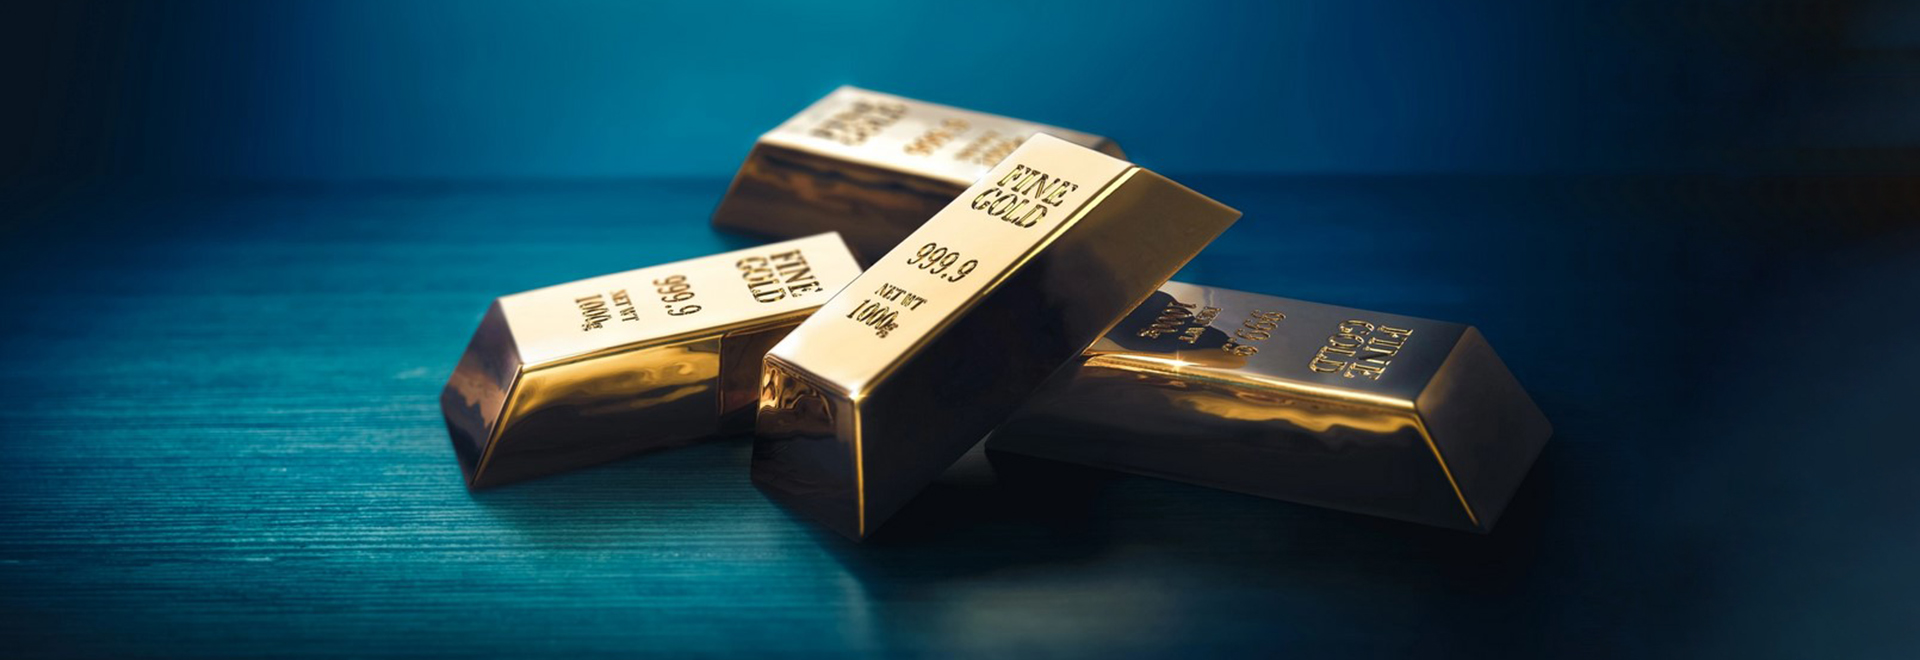 Gold Price Rebounds on Tuesday